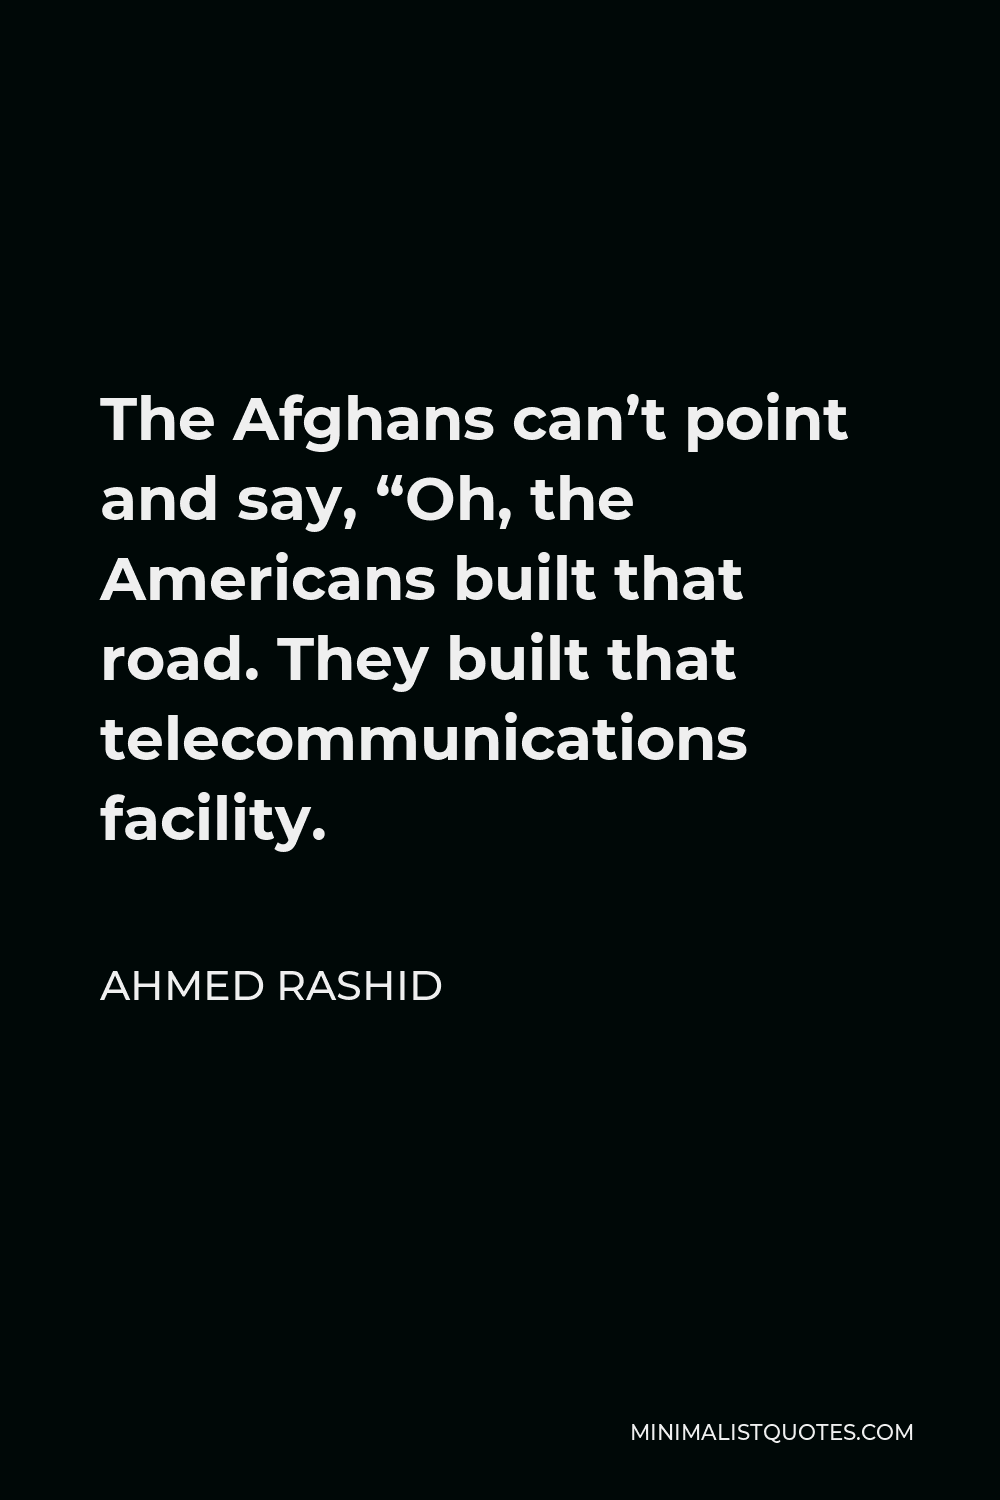 Ahmed Rashid Quote - The Afghans can’t point and say, “Oh, the Americans built that road. They built that telecommunications facility.